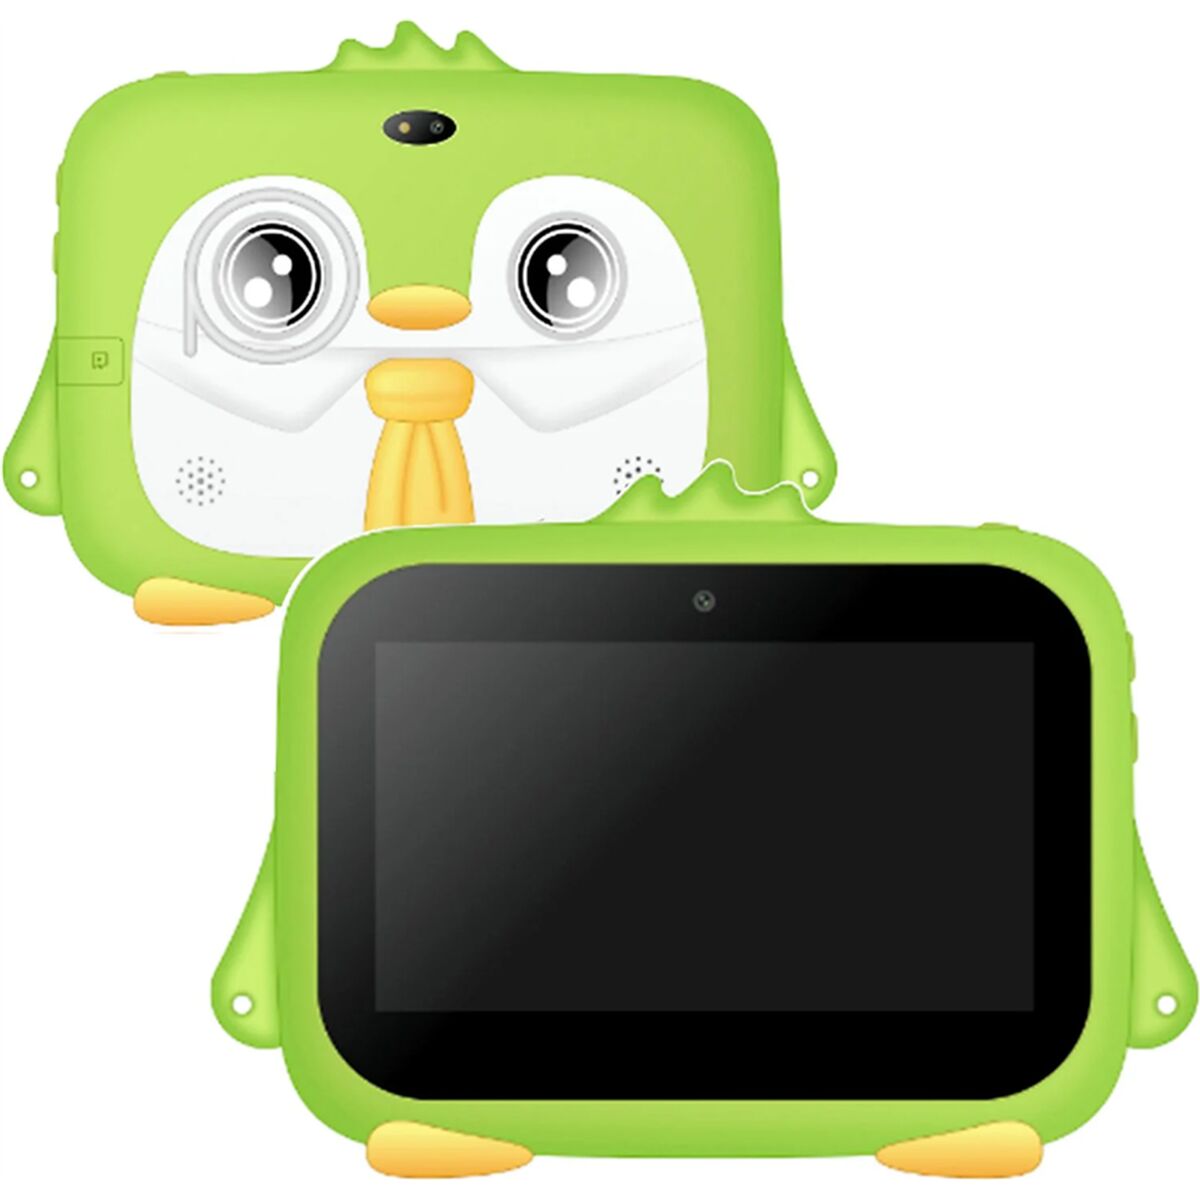 Interactive Tablet for Children K716 Green 8 GB 1 GB RAM 7", BigBuy Tech, Toys and games, Electronic toys, interactive-tablet-for-children-k716-green-8-gb-1-gb-ram-7, Brand_BigBuy Tech, category-reference-2609, category-reference-2617, category-reference-2626, category-reference-t-11190, category-reference-t-11203, category-reference-t-11206, category-reference-t-19663, Condition_NEW, entertainment, para los más peques, Price_50 - 100, telephones & tablets, vuelta al cole, RiotNook